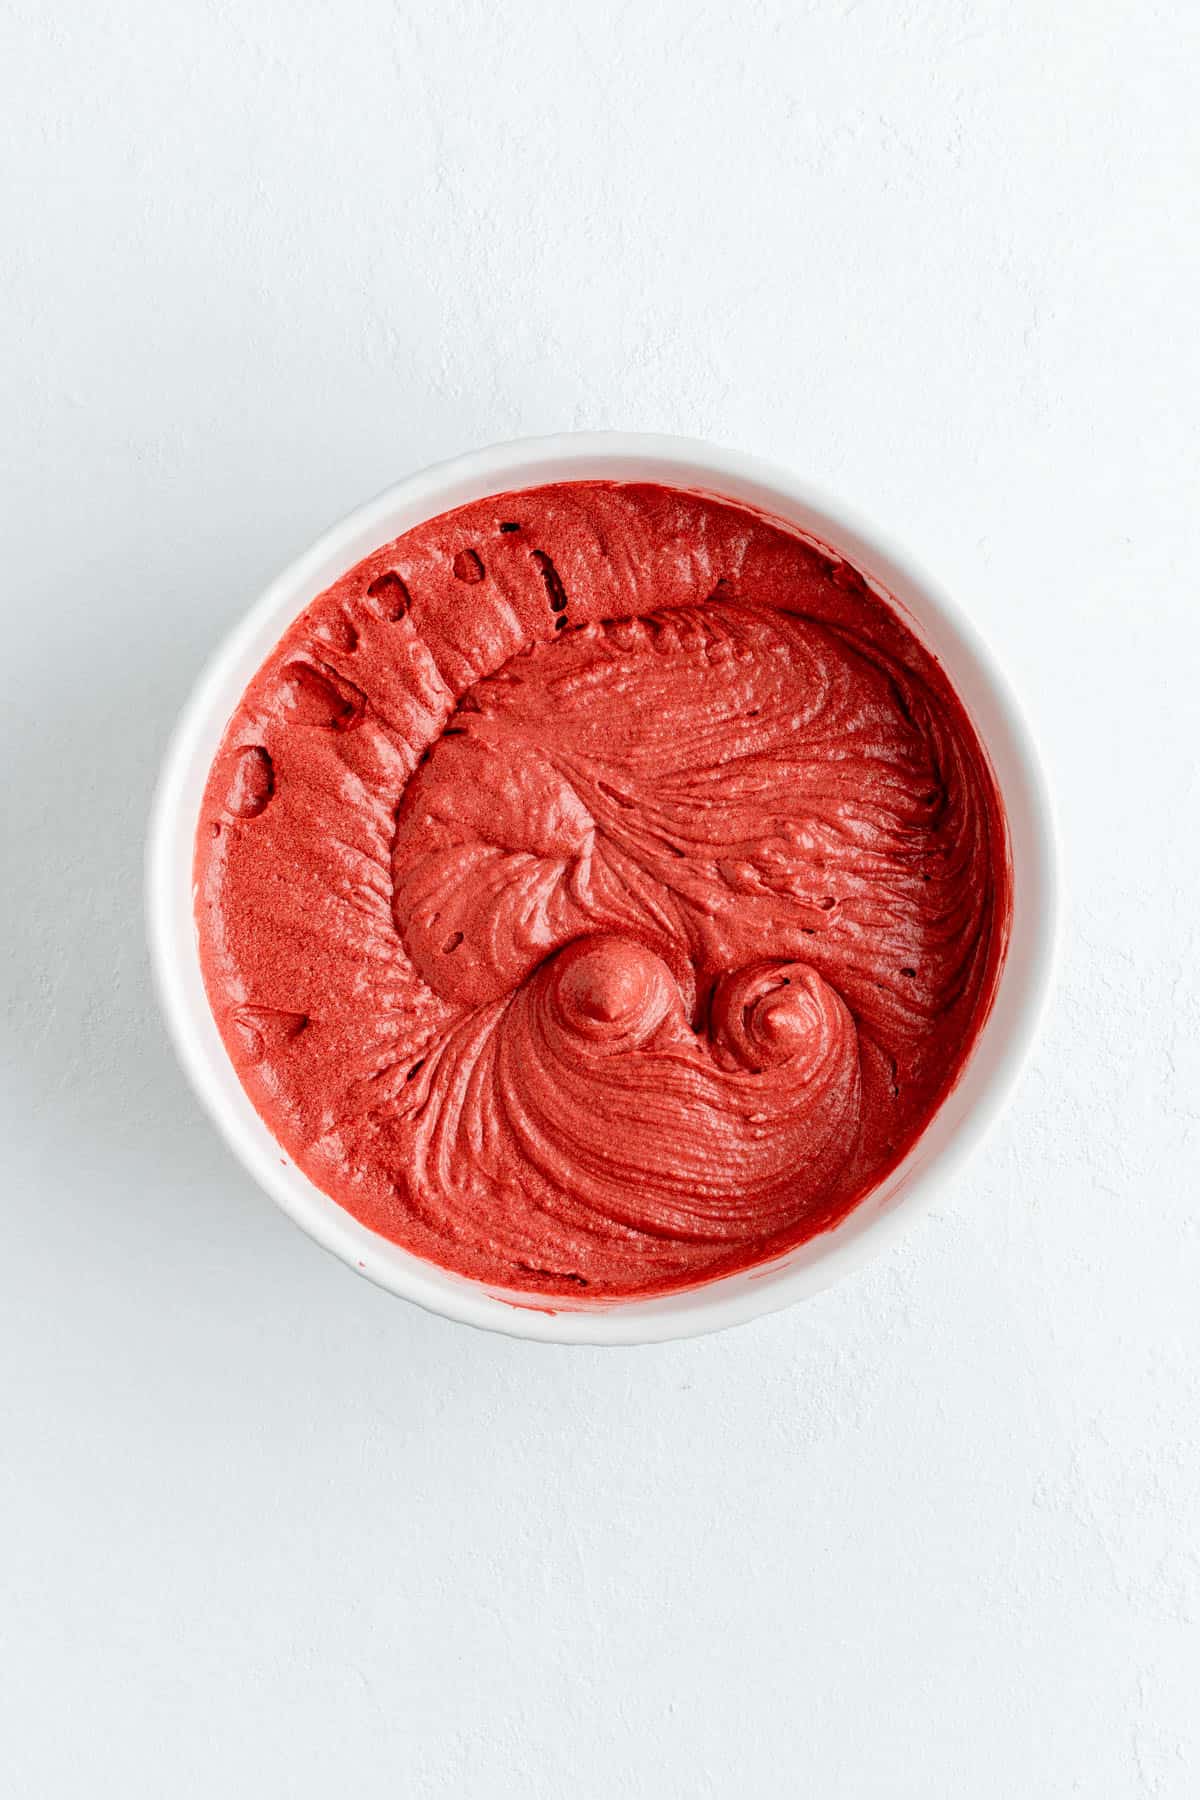 red the cake batter in white bowl on white background.